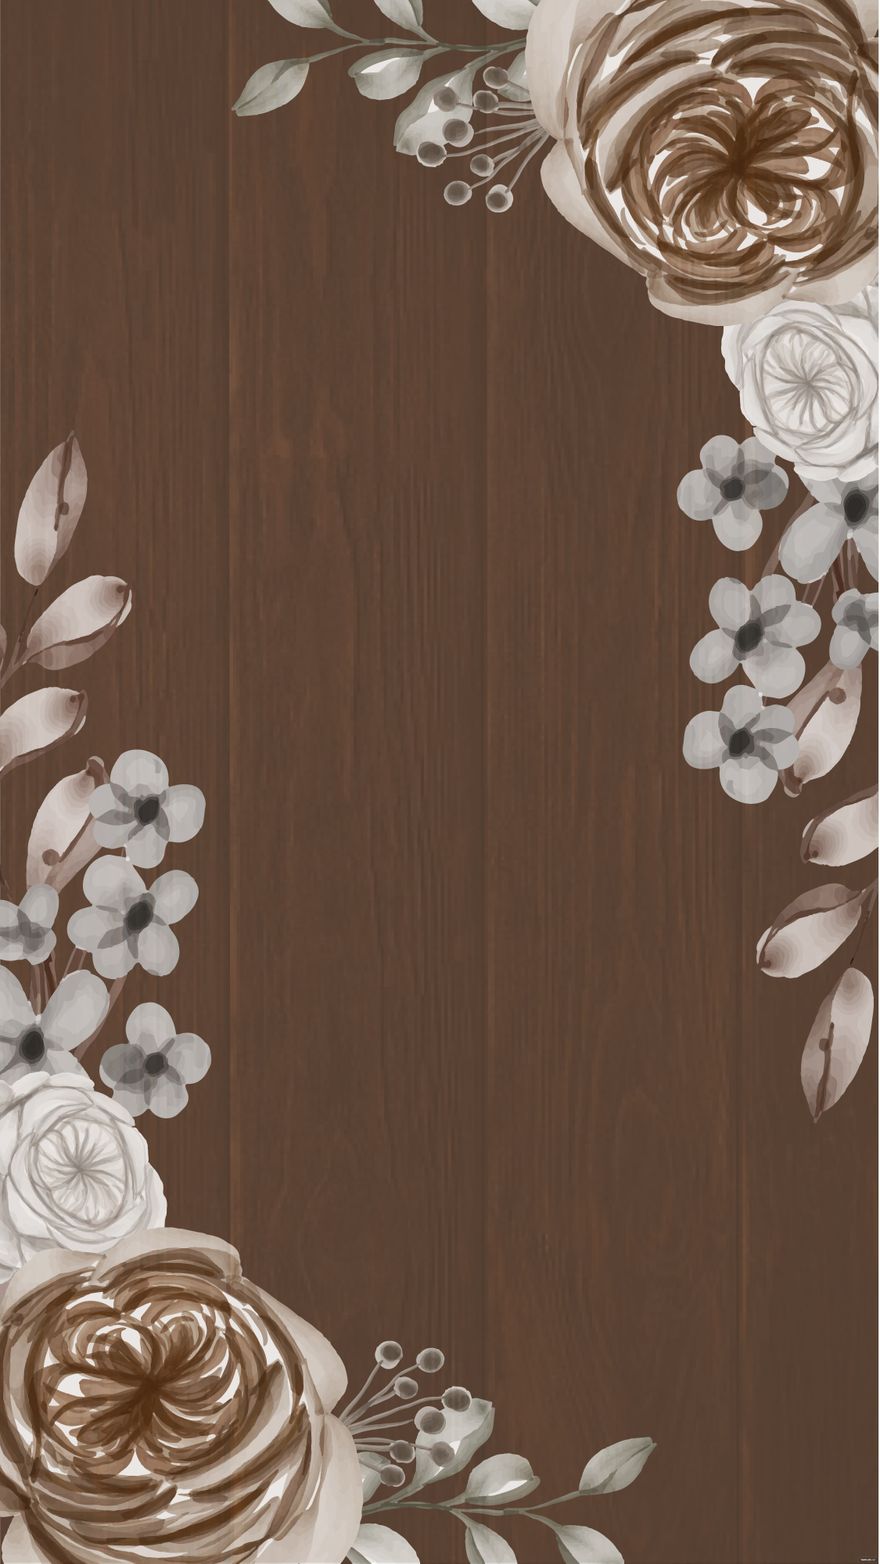 Free Rustic Wedding Floral Background